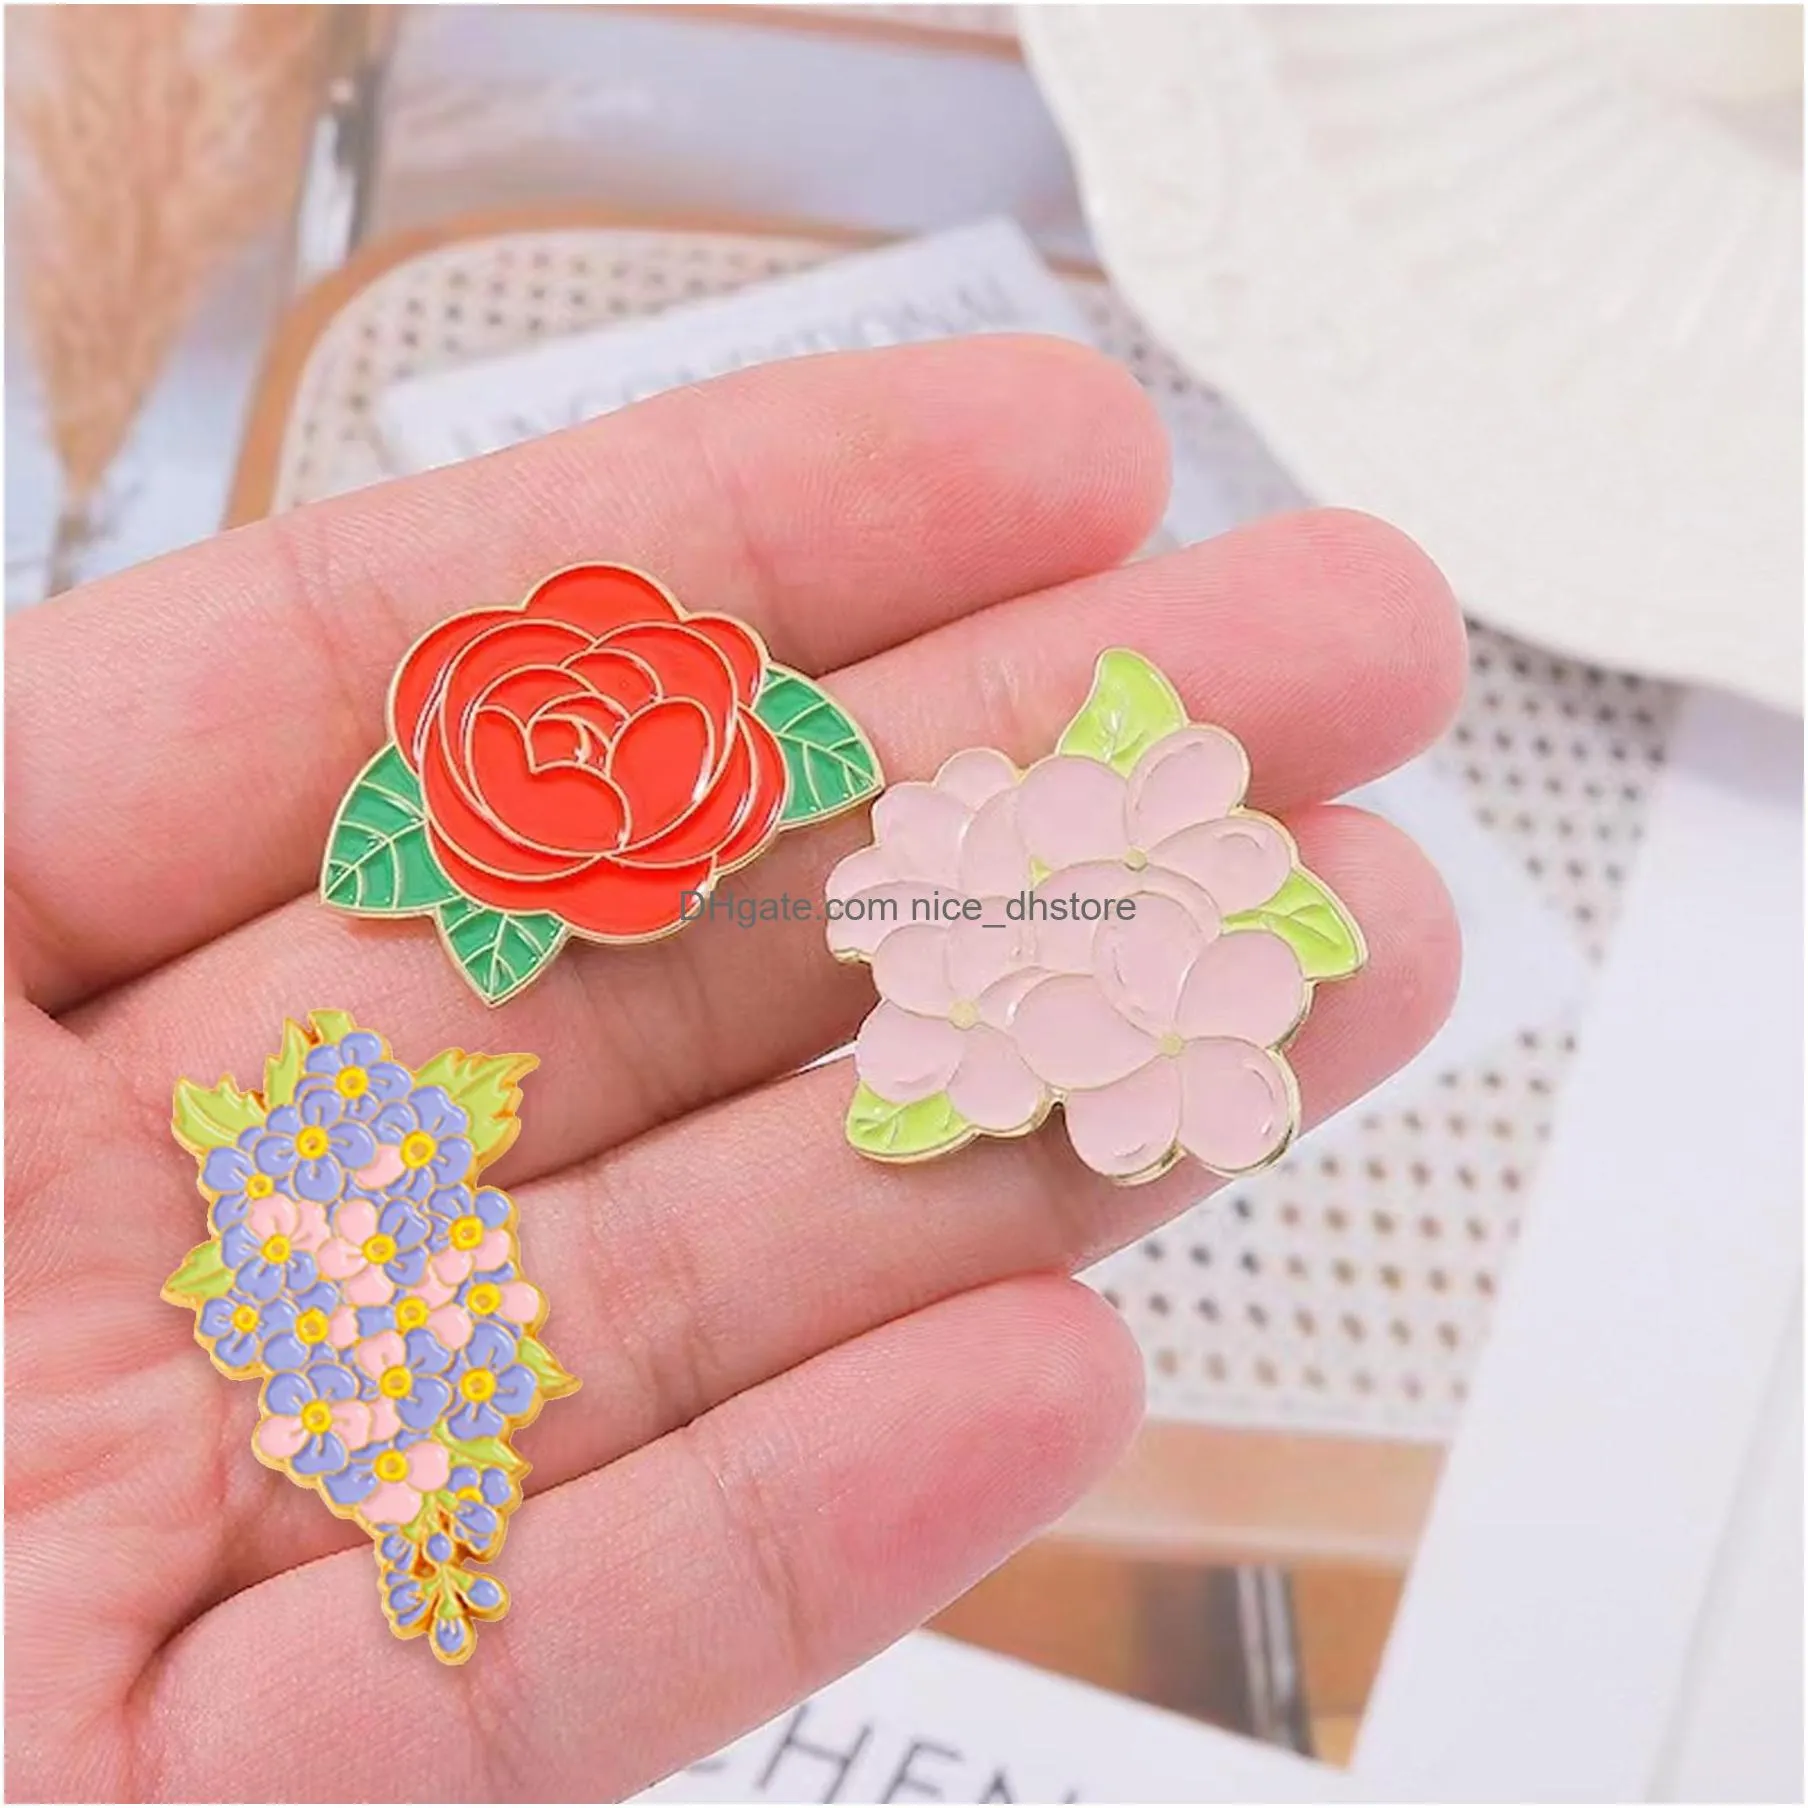 creative enamel pins bulk set cute cartoon plants anime sets backpack pins for men/women cool lapel badge funny pins jewelry for jackets cloths hats decorations